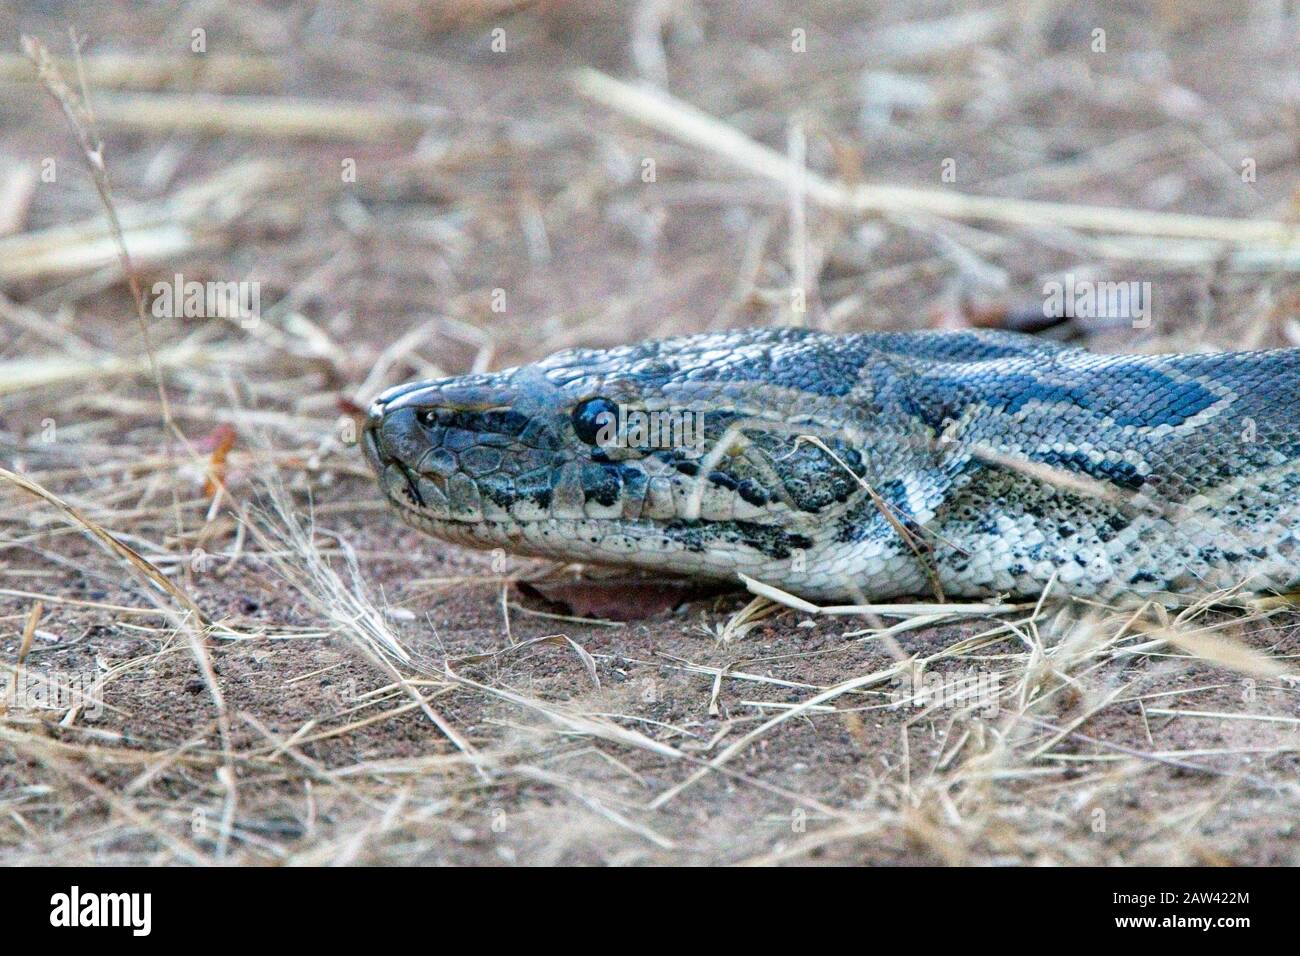 African Rock Python (Python sebae), This snake was at least 3 metres in length, near Tendaba, Gambia. Stock Photo